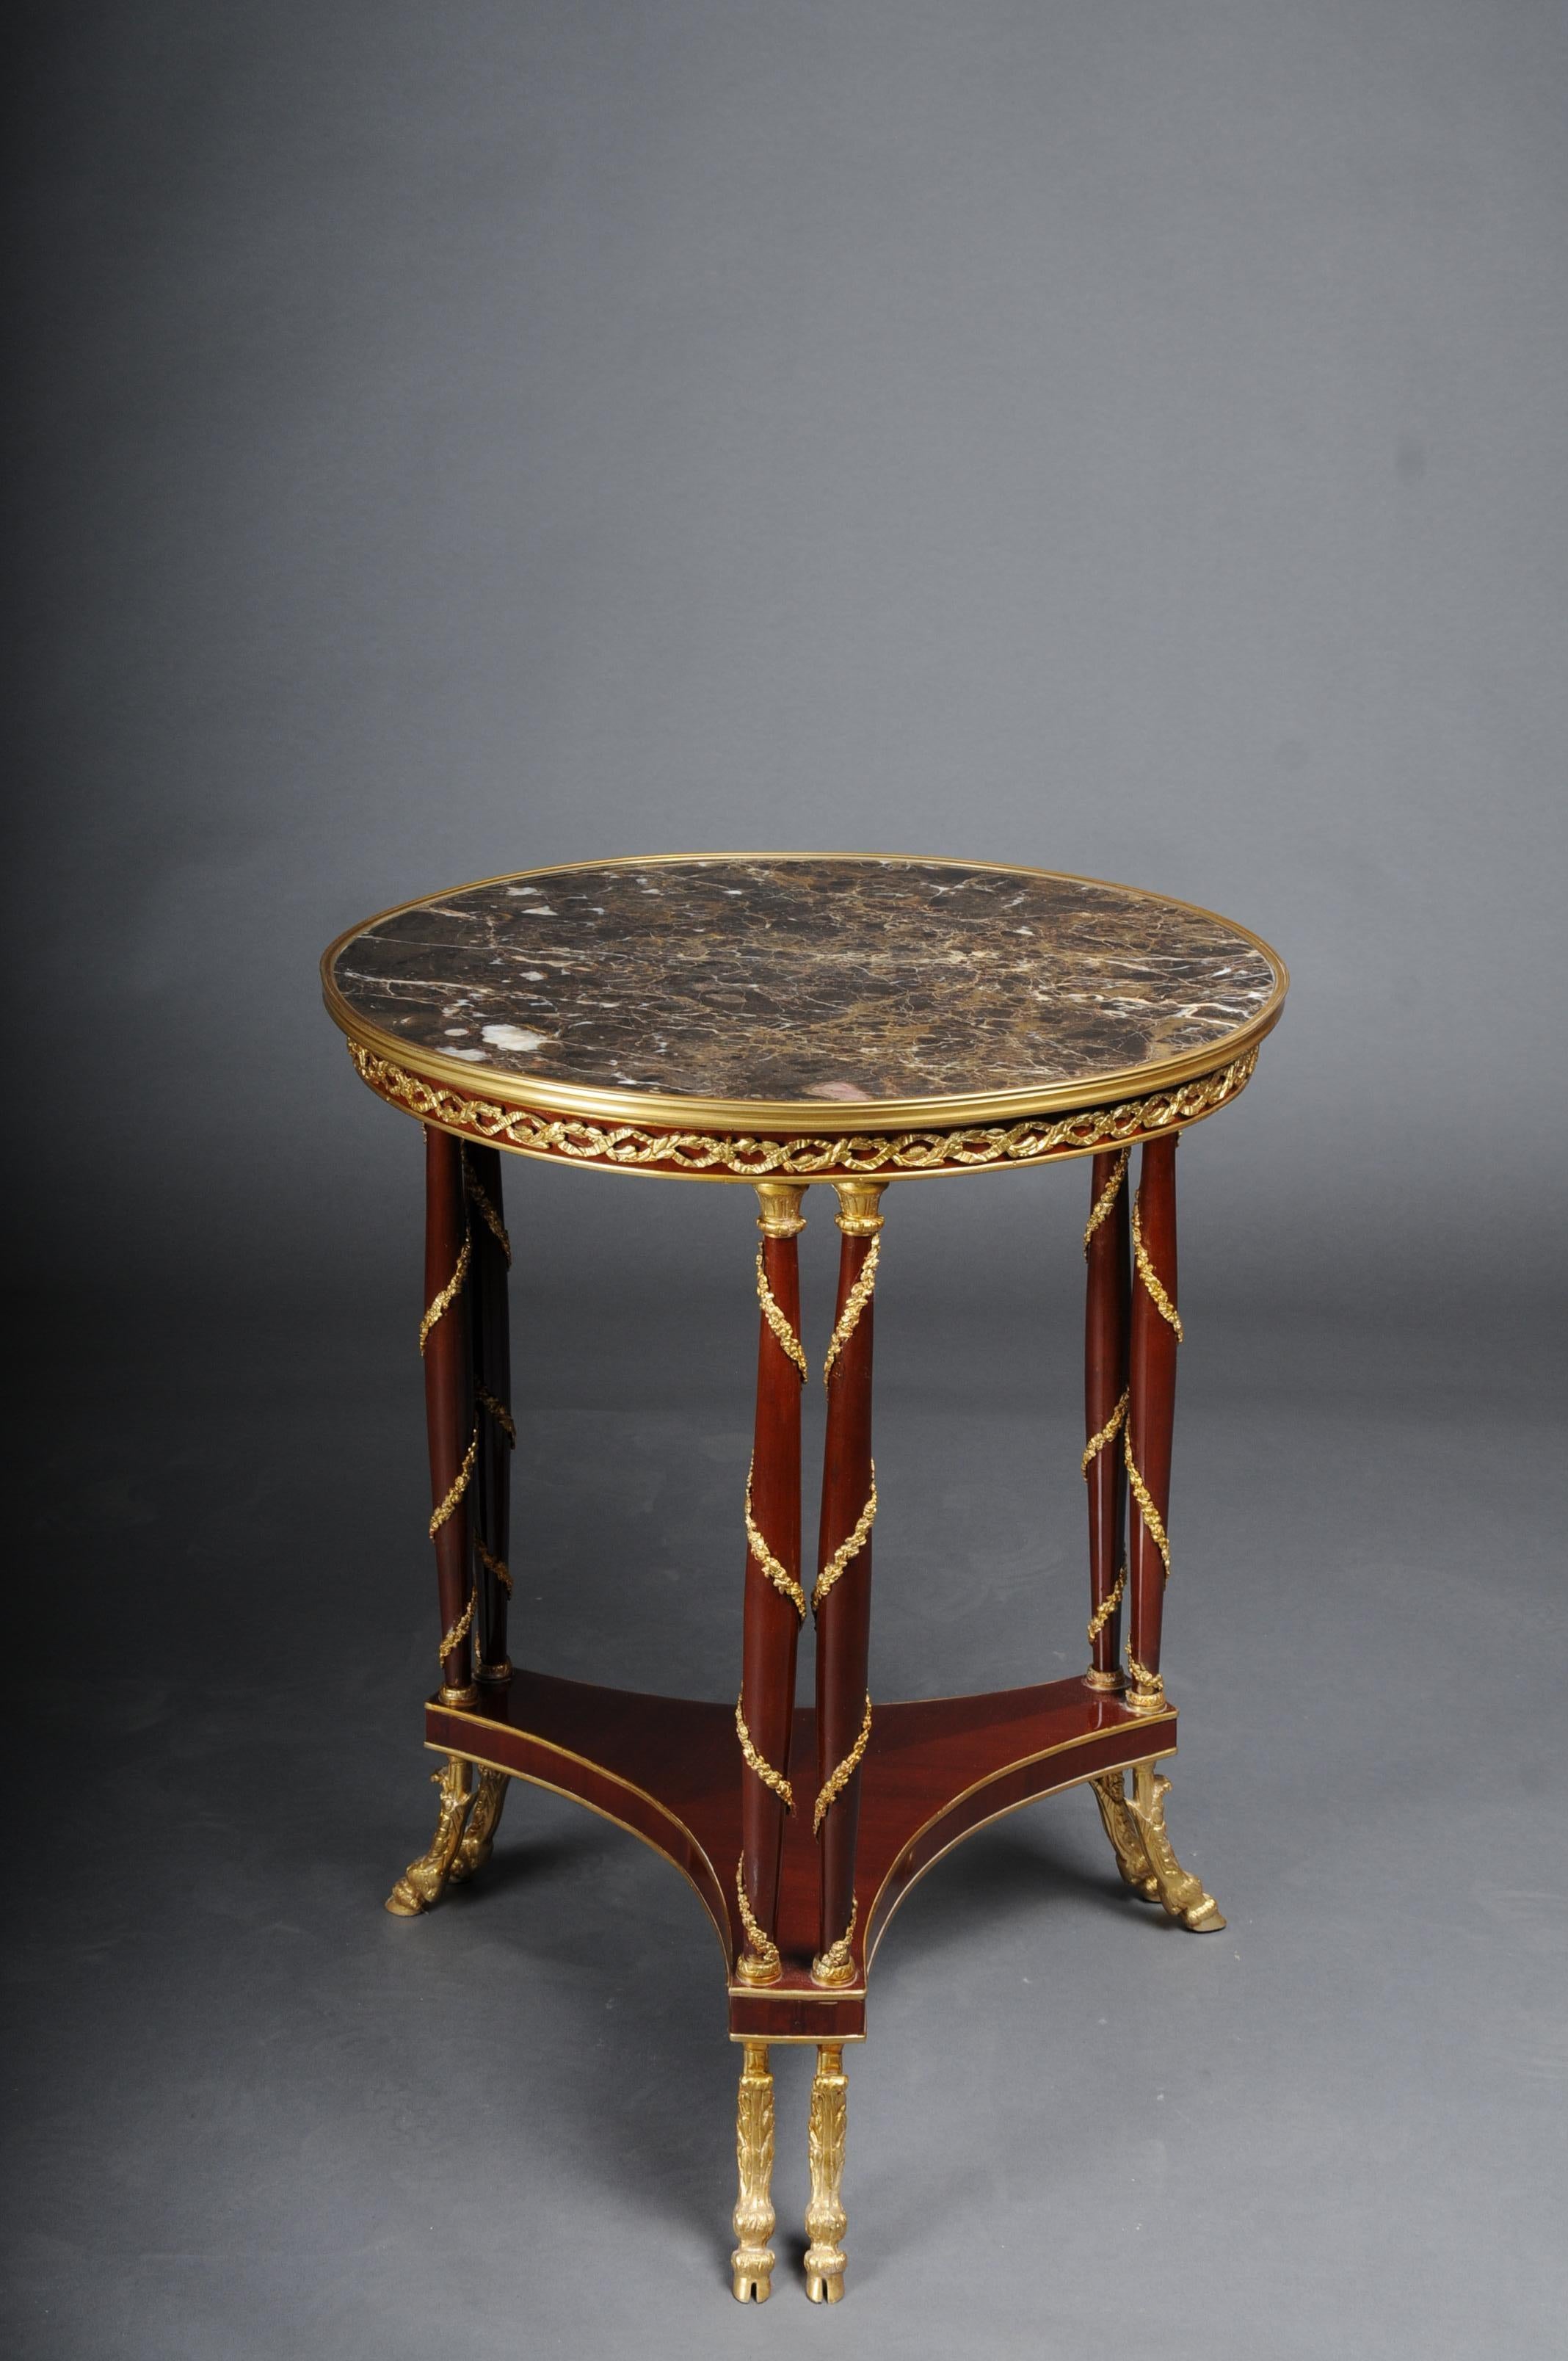 20th century Majestic Empire Salon table/Gueridon, beechwood, marble

Solid beech wood, with gilded brass bronze. Top plate with brass-framed marble top.
Elegant solid column legs wrapped with gilded brass fittings, connected below by a curved